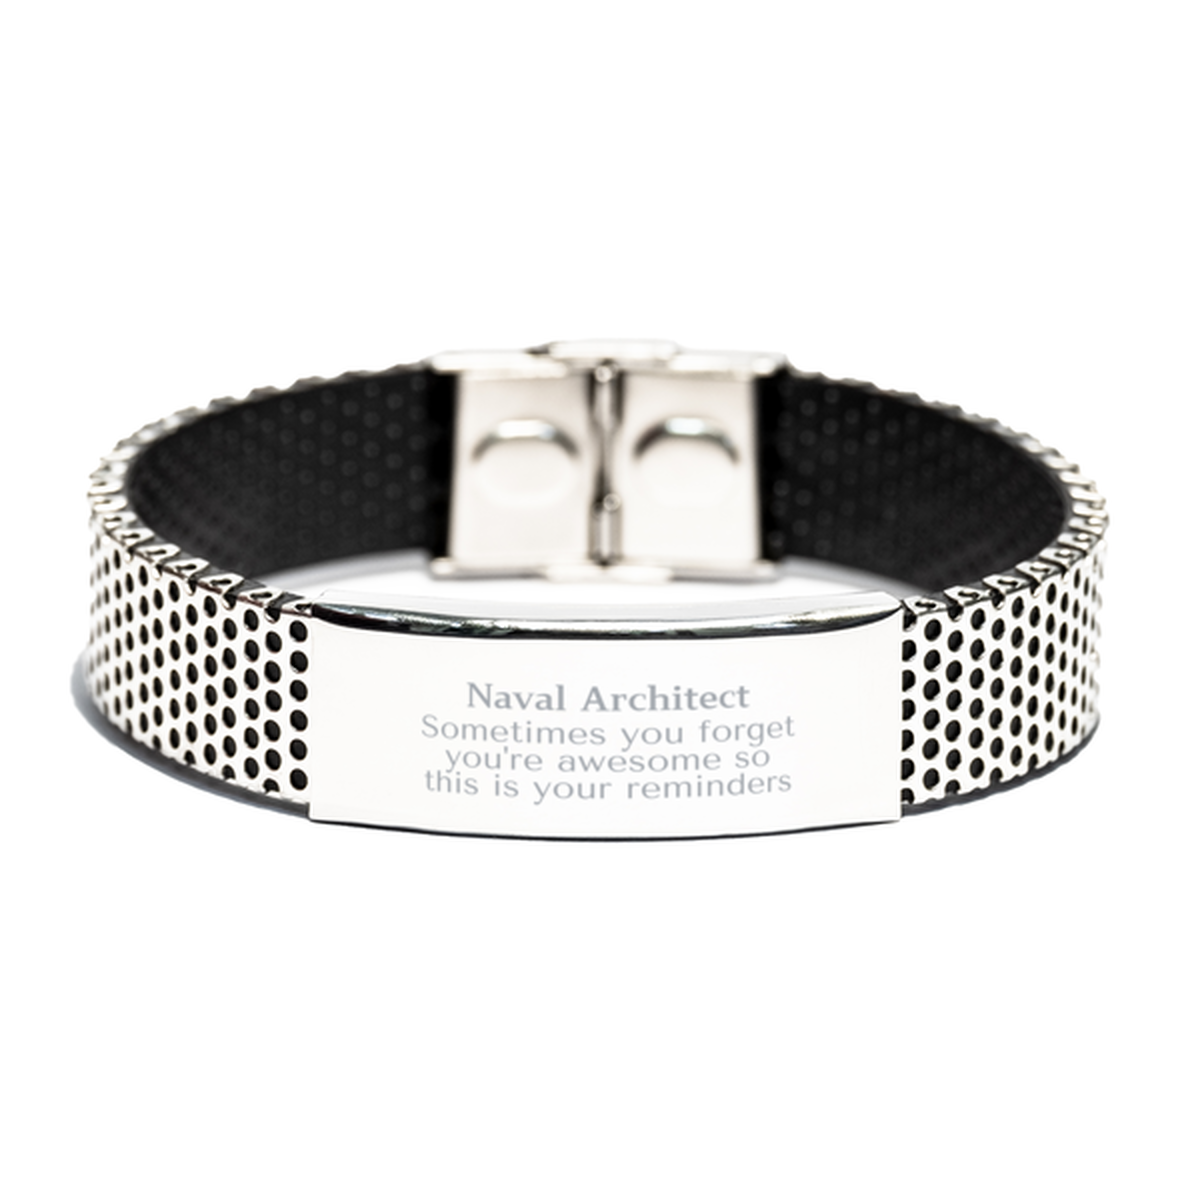 Sentimental Naval Architect Stainless Steel Bracelet, Naval Architect Sometimes you forget you're awesome so this is your reminders, Graduation Christmas Birthday Gifts for Naval Architect, Men, Women, Coworkers